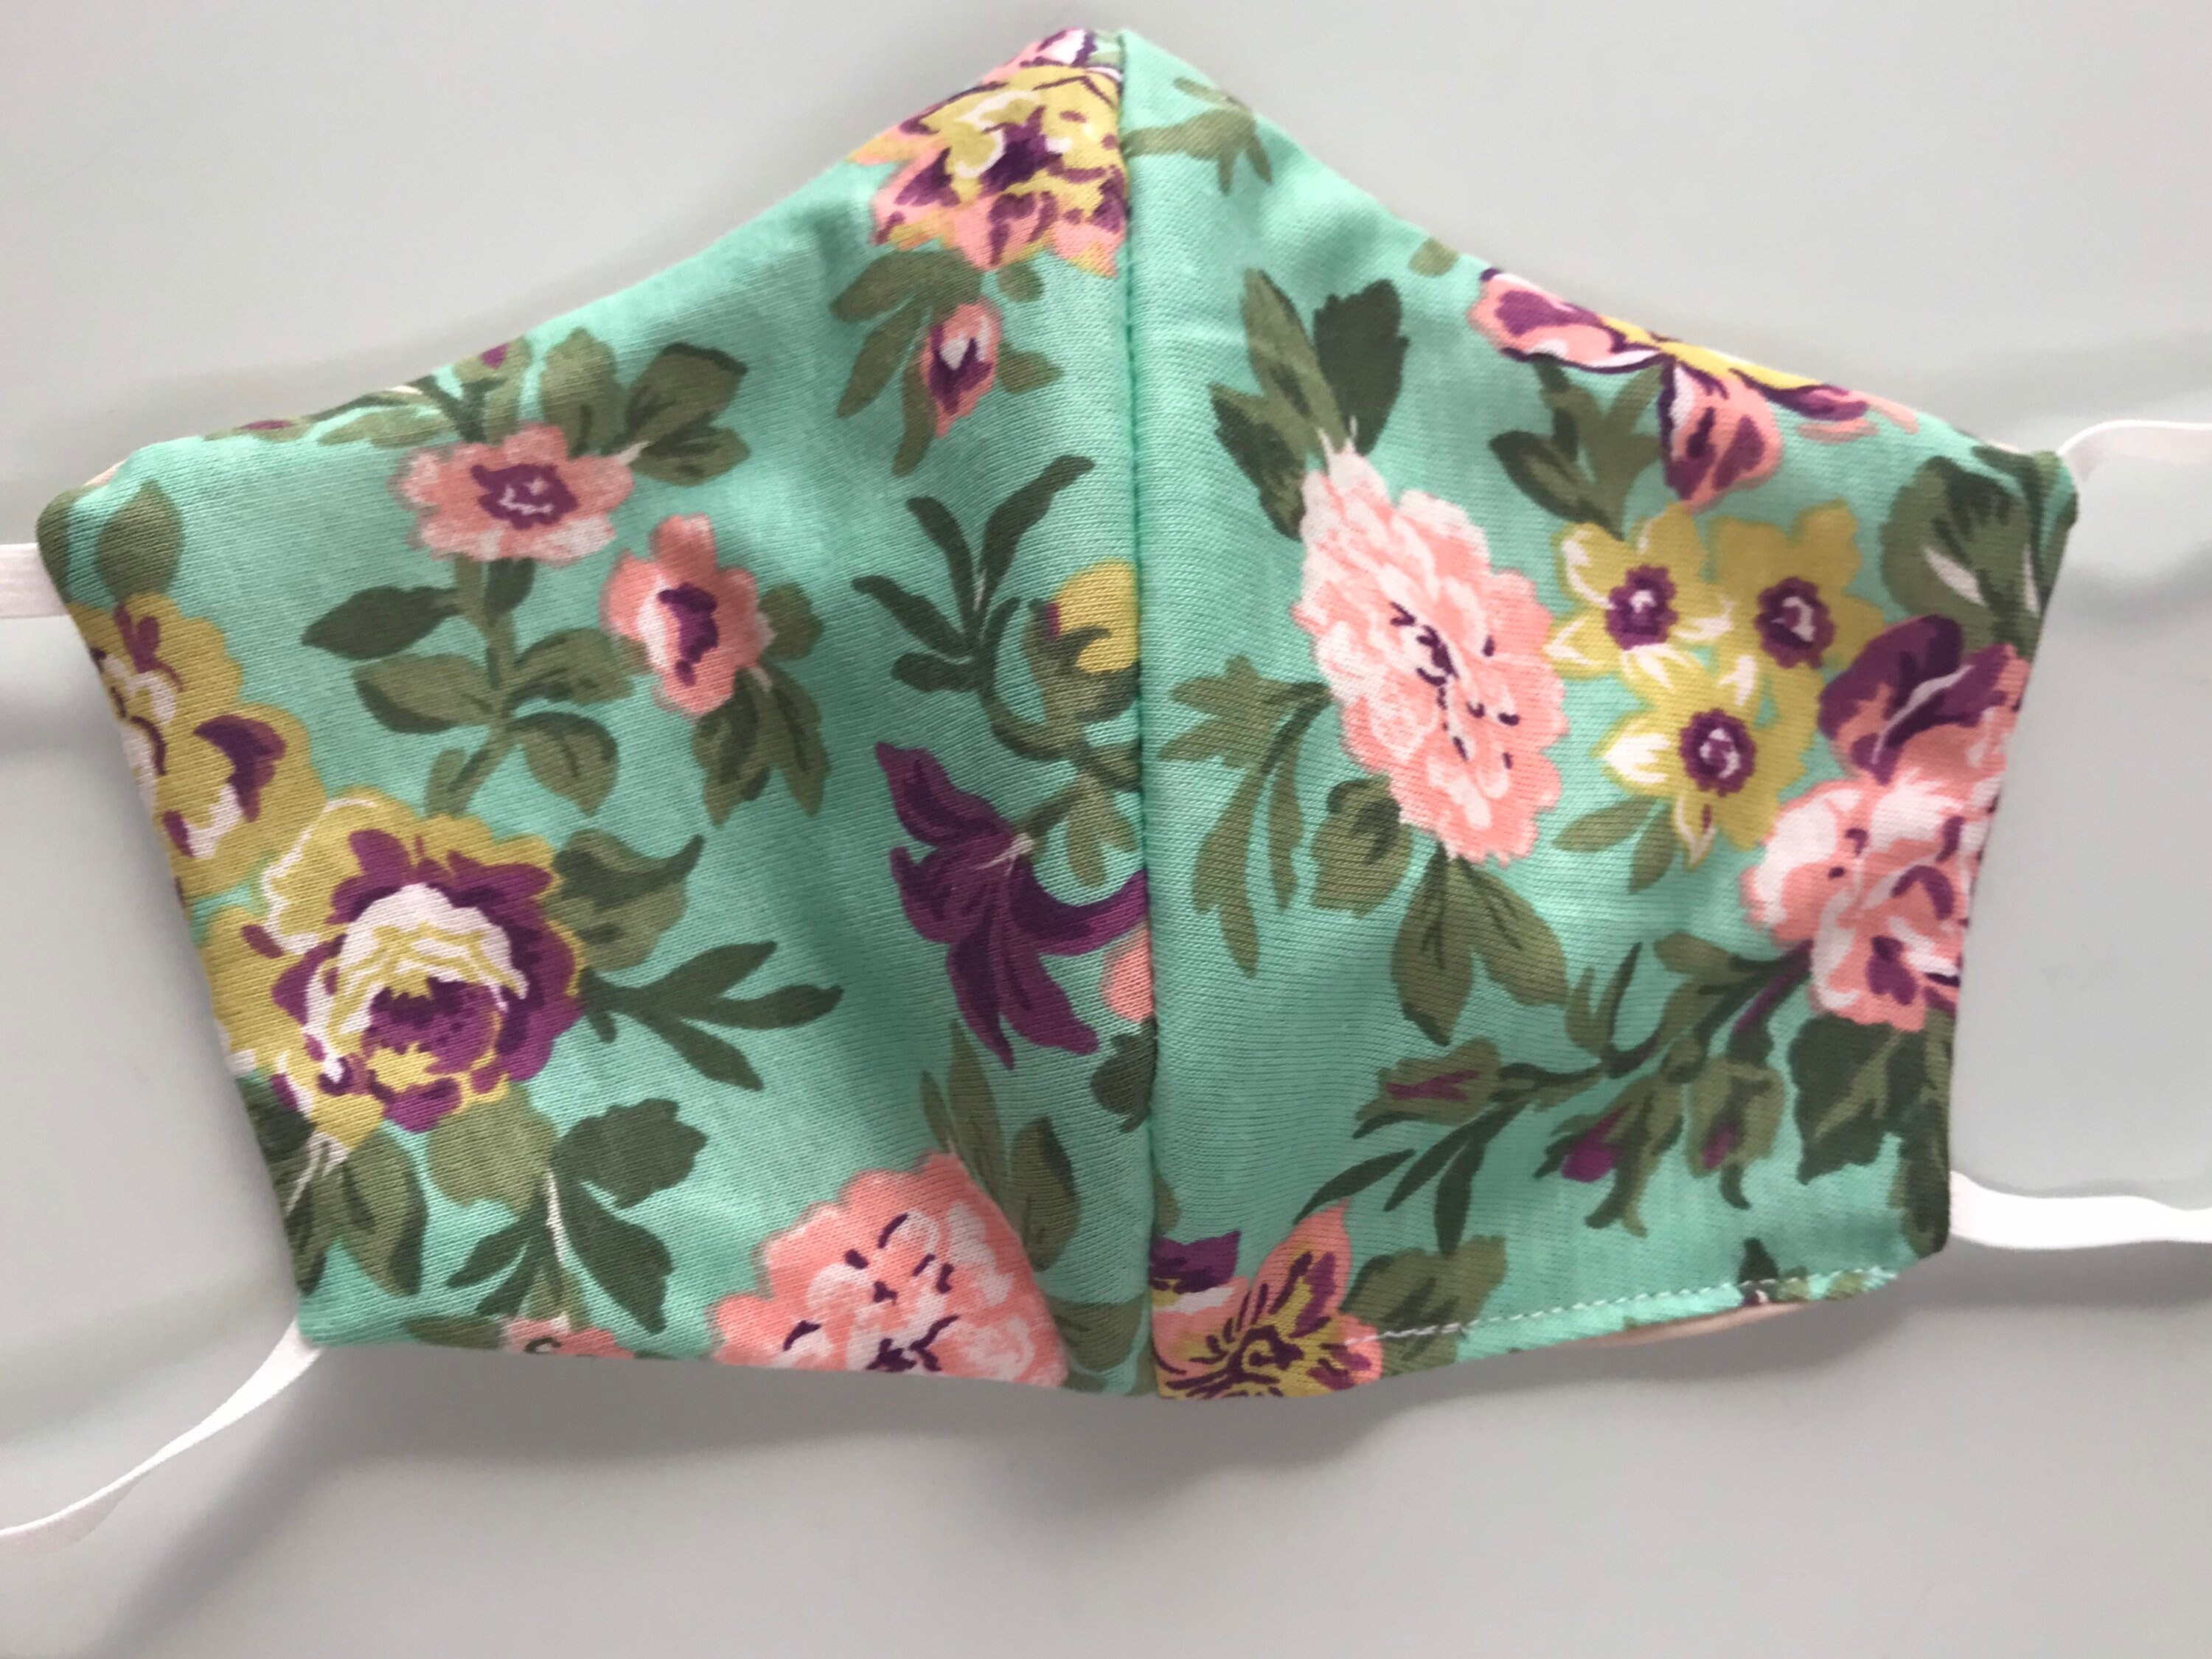 Floral Face Mask - Cotton Spandex Blend Fabric, Solid Color On Back, Adult Size